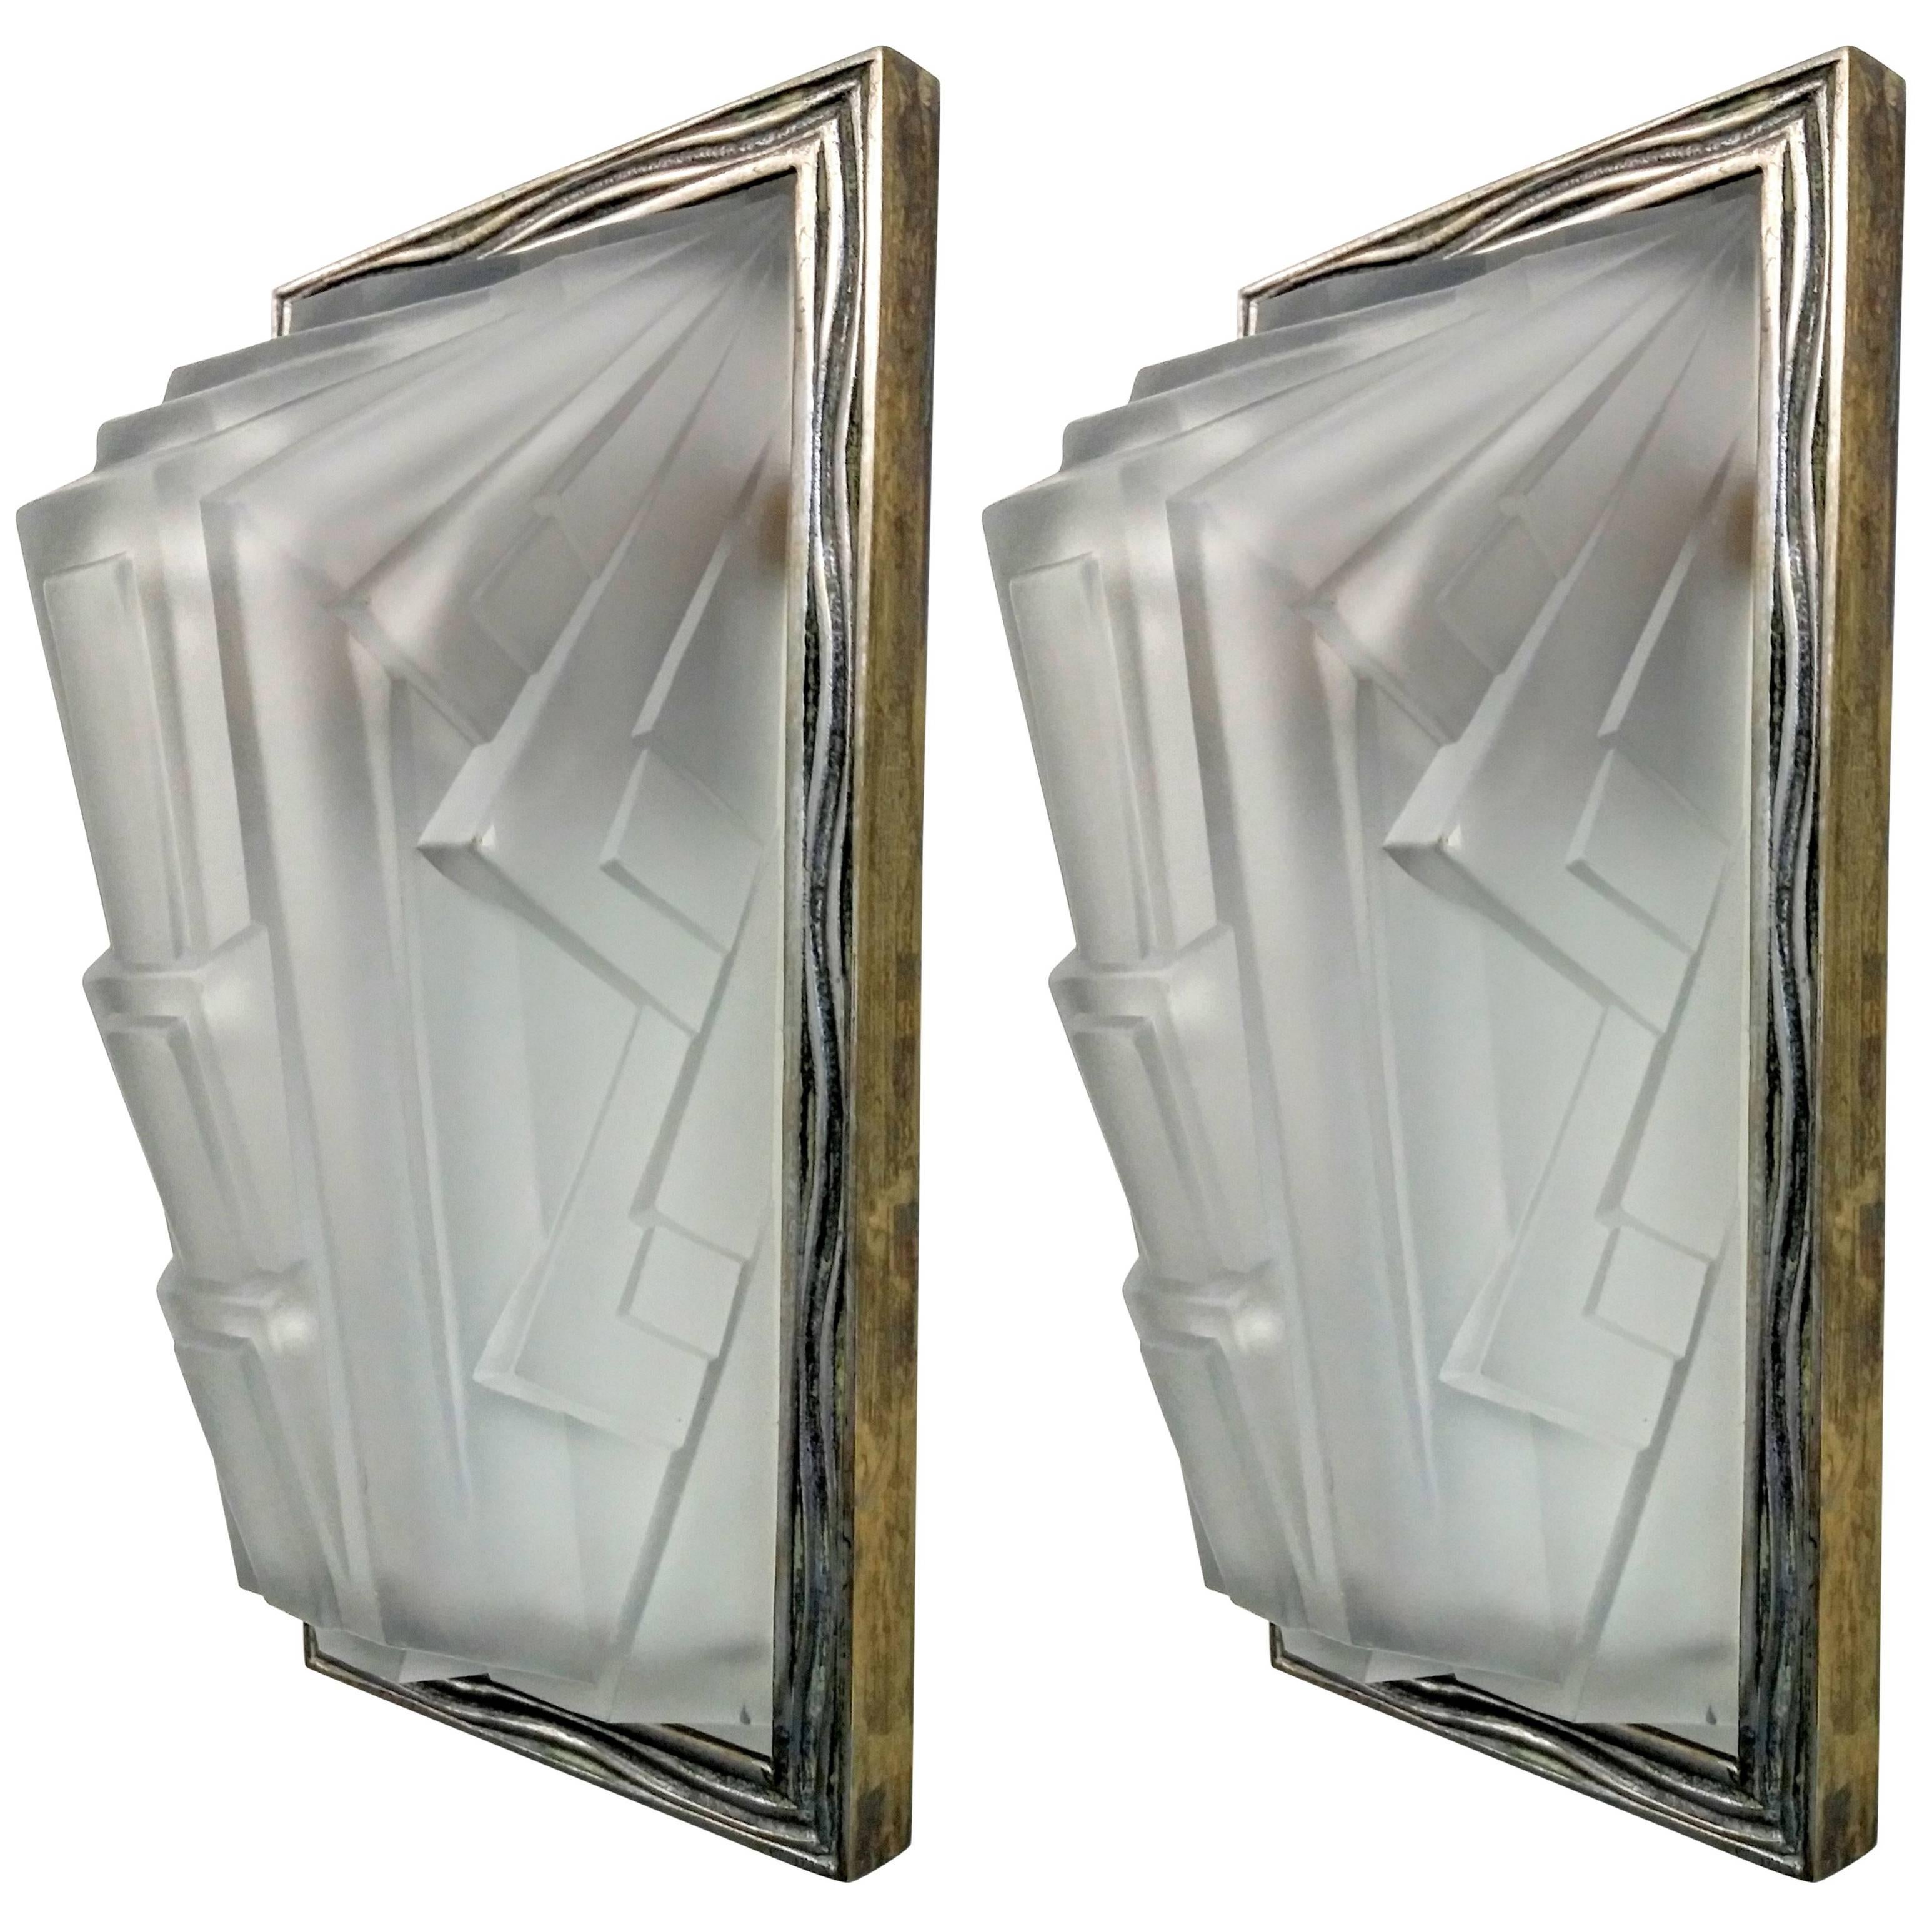 Pair of French Art Deco Wall Sconces by Sabino